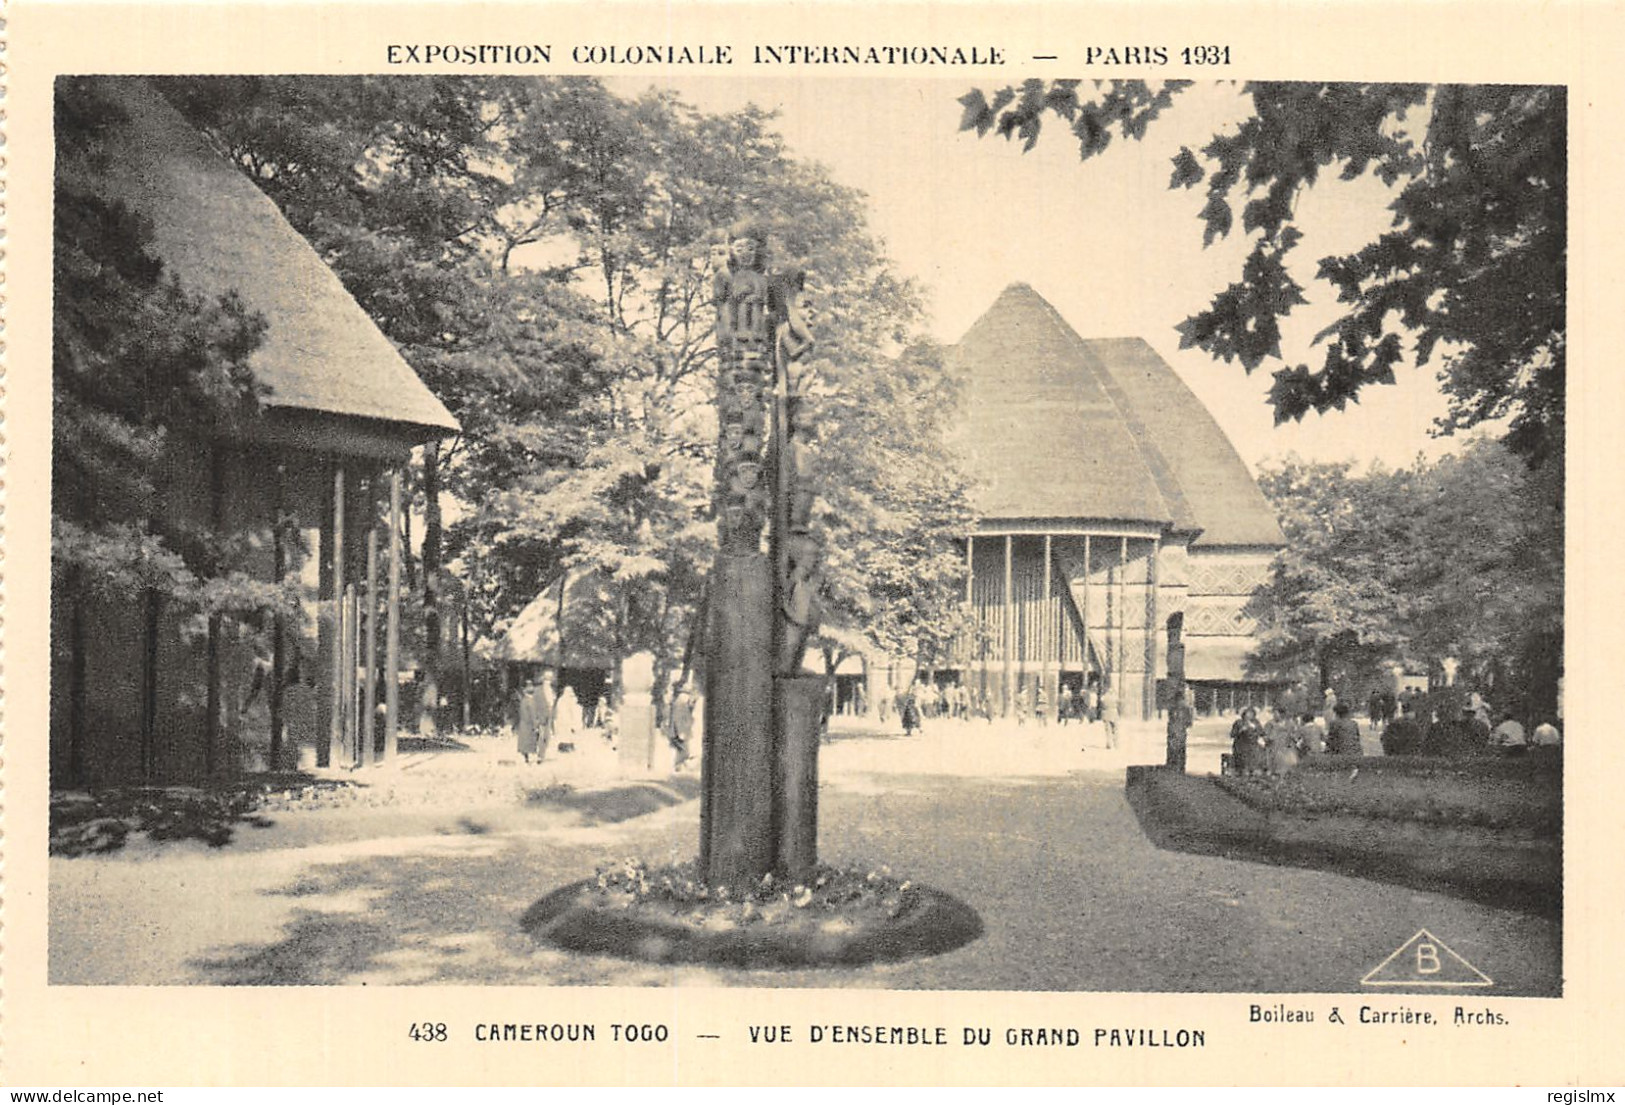 75-PARIS EXPOSTITION COLONIALE INTERNATIONALE 1931 CAMEROUN TOGO-N°T1054-H/0205 - Expositions